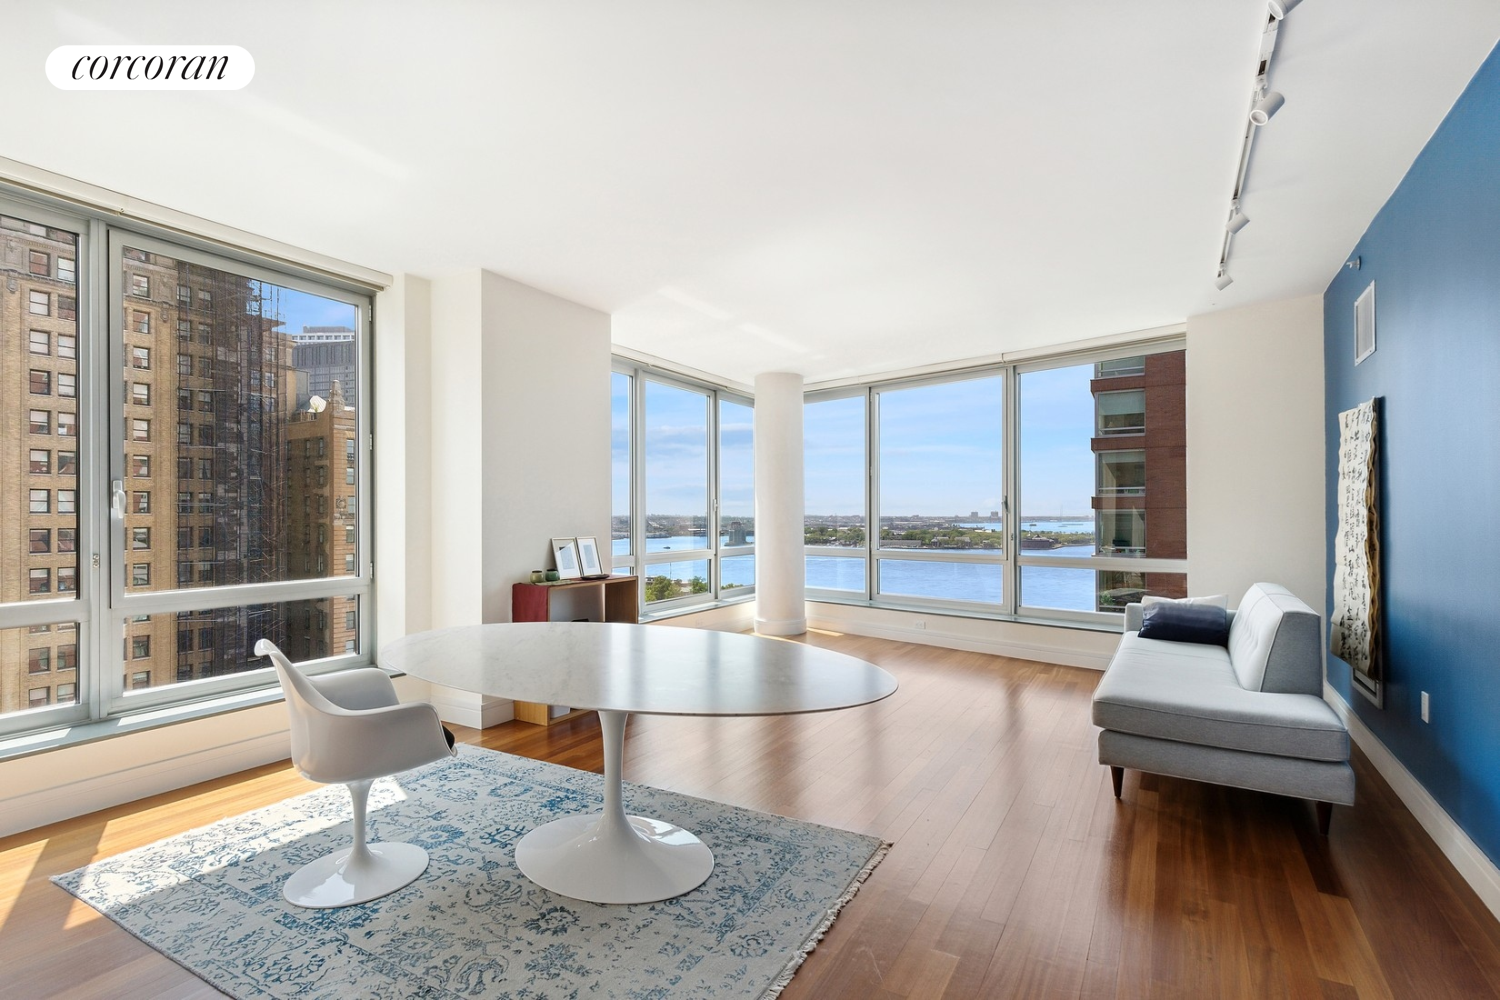 30 West Street 22E, Battery Park City, Downtown, NYC - 2 Bedrooms  
2.5 Bathrooms  
4 Rooms - 